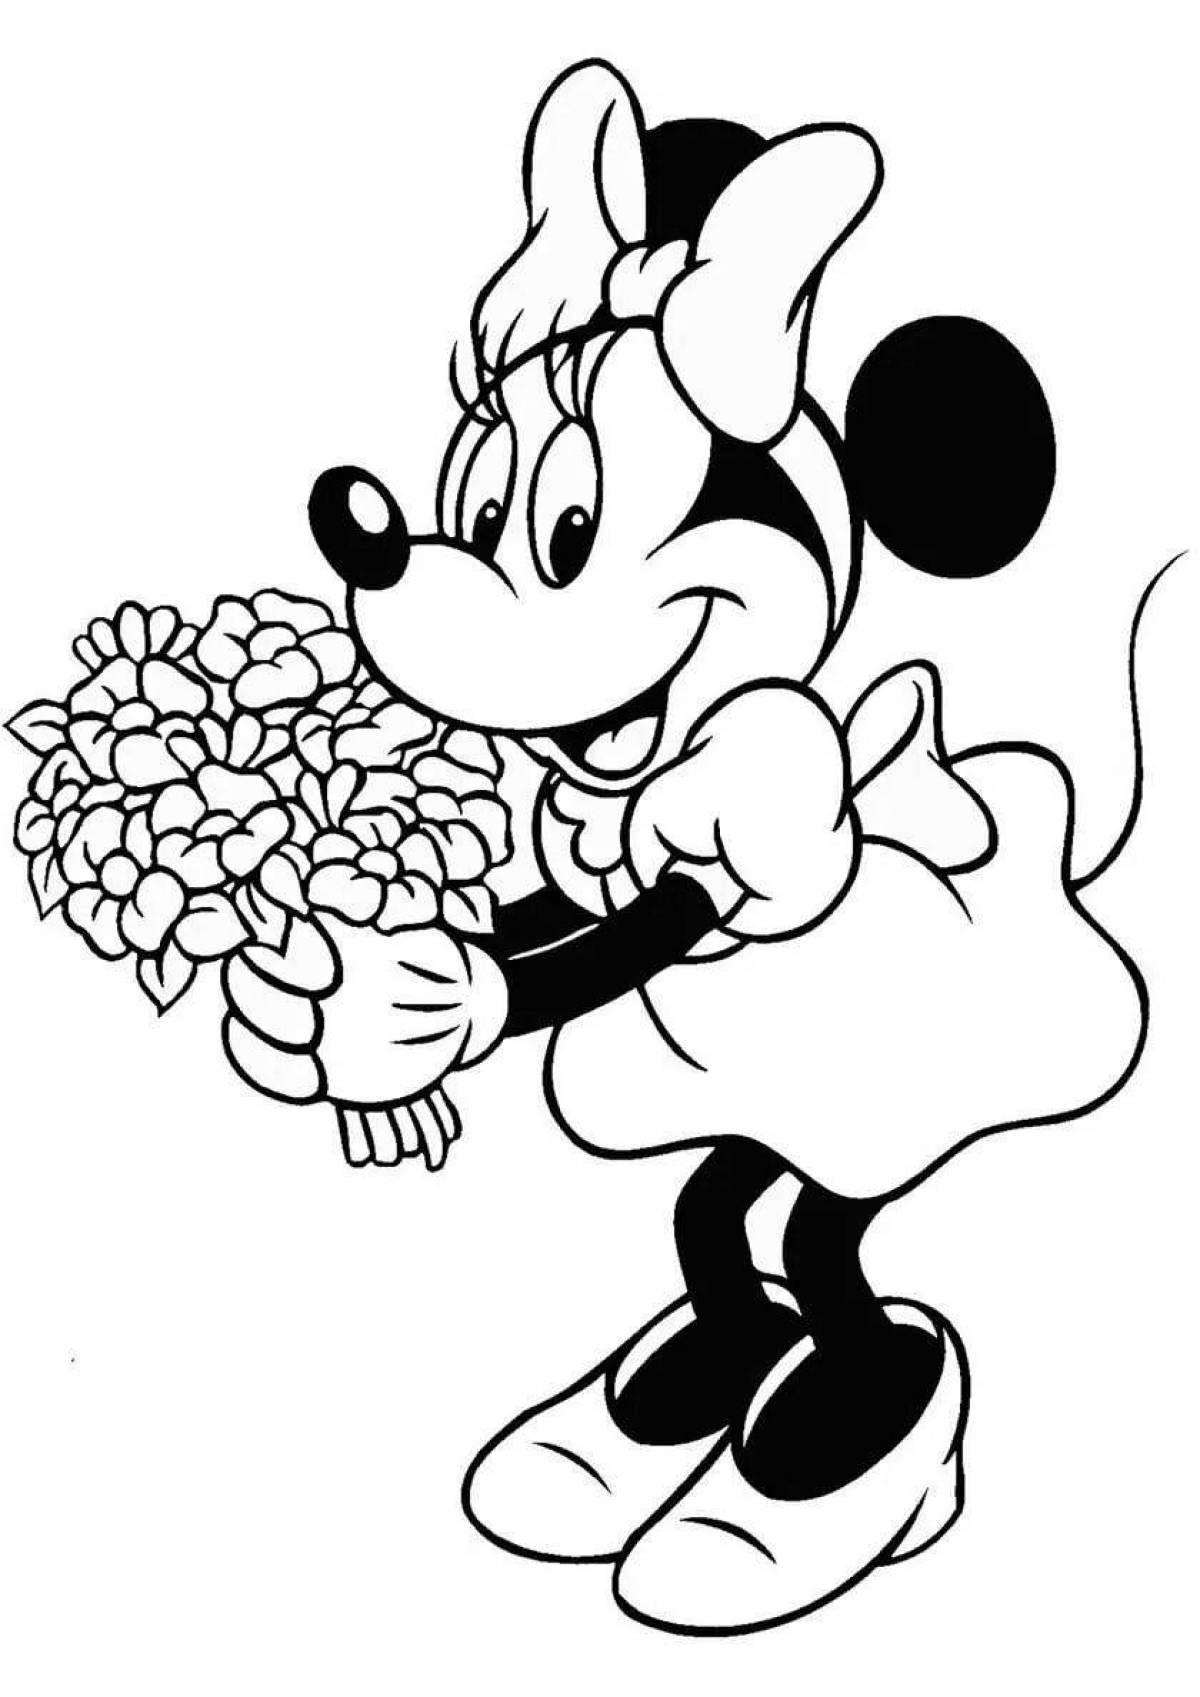 Mickey mouse creative coloring book